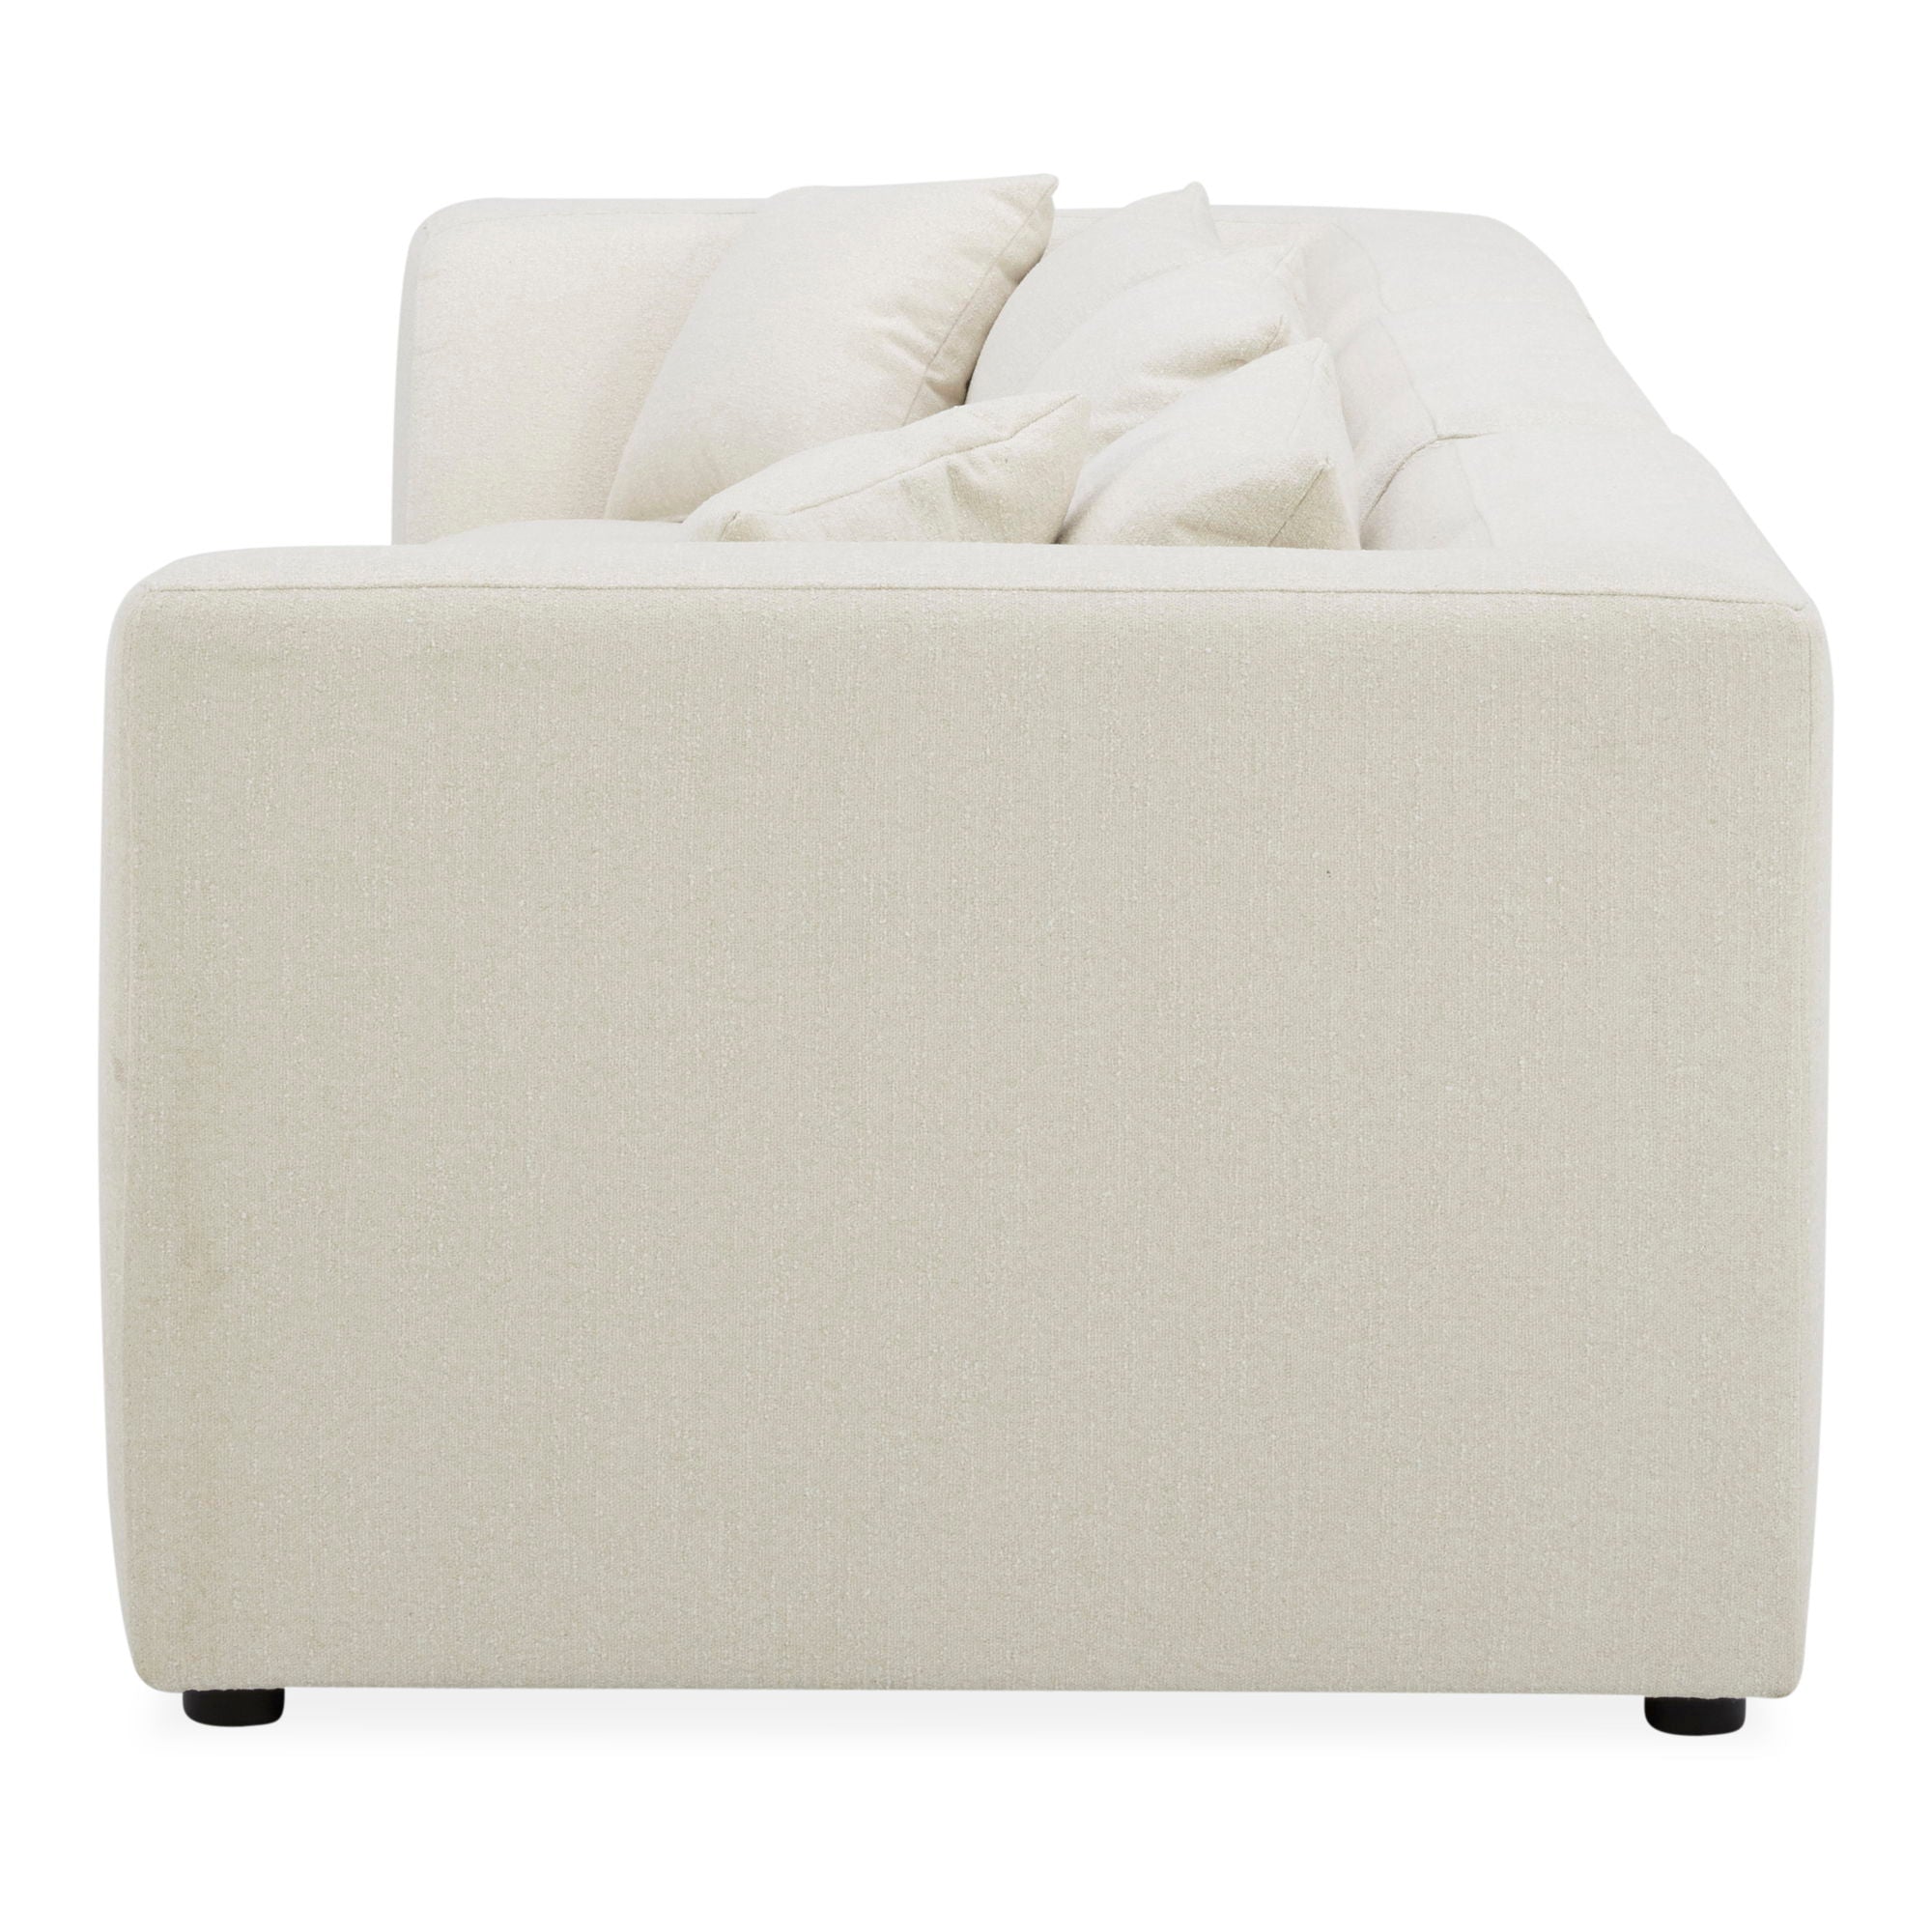 Lowtide - Modular Sofa - Warm White-Stationary Sectionals-American Furniture Outlet